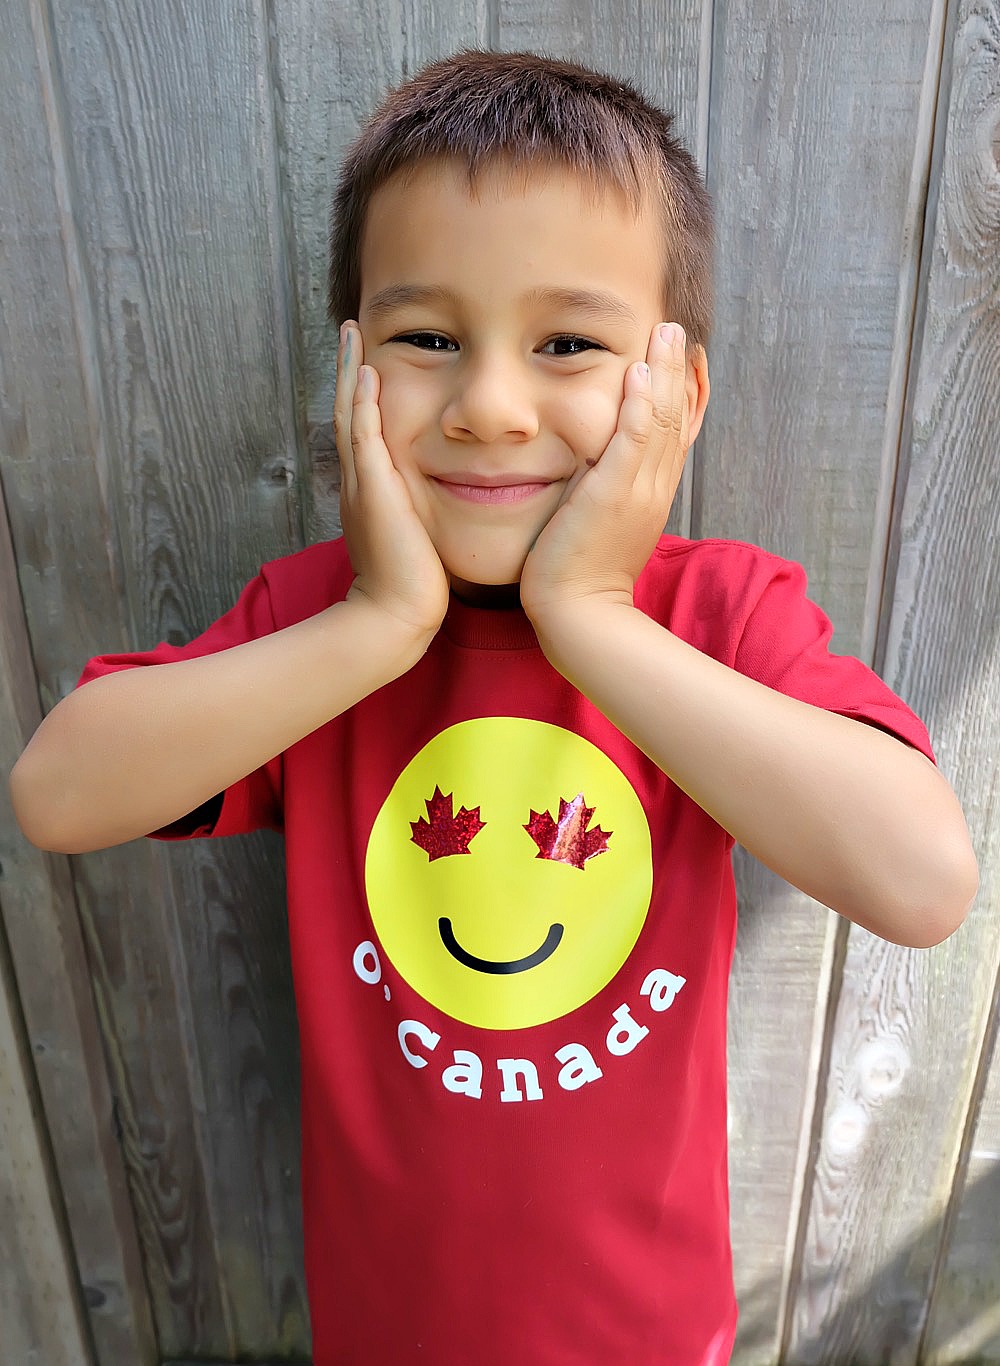 Celebrate your Canadian Patriotism and your love for emojis with one super cute shirt! This DIY Canada Emoji Shirt has maple leafs for the eyes and is perfect for Canada Day. Includes step by step instructions and photos along with the cut file. Perfect for making with your Cricut Explore Air or your Cricut Maker. Get crafting! #CricutMade #emojis #Cricut #CanadaDay #DIY 